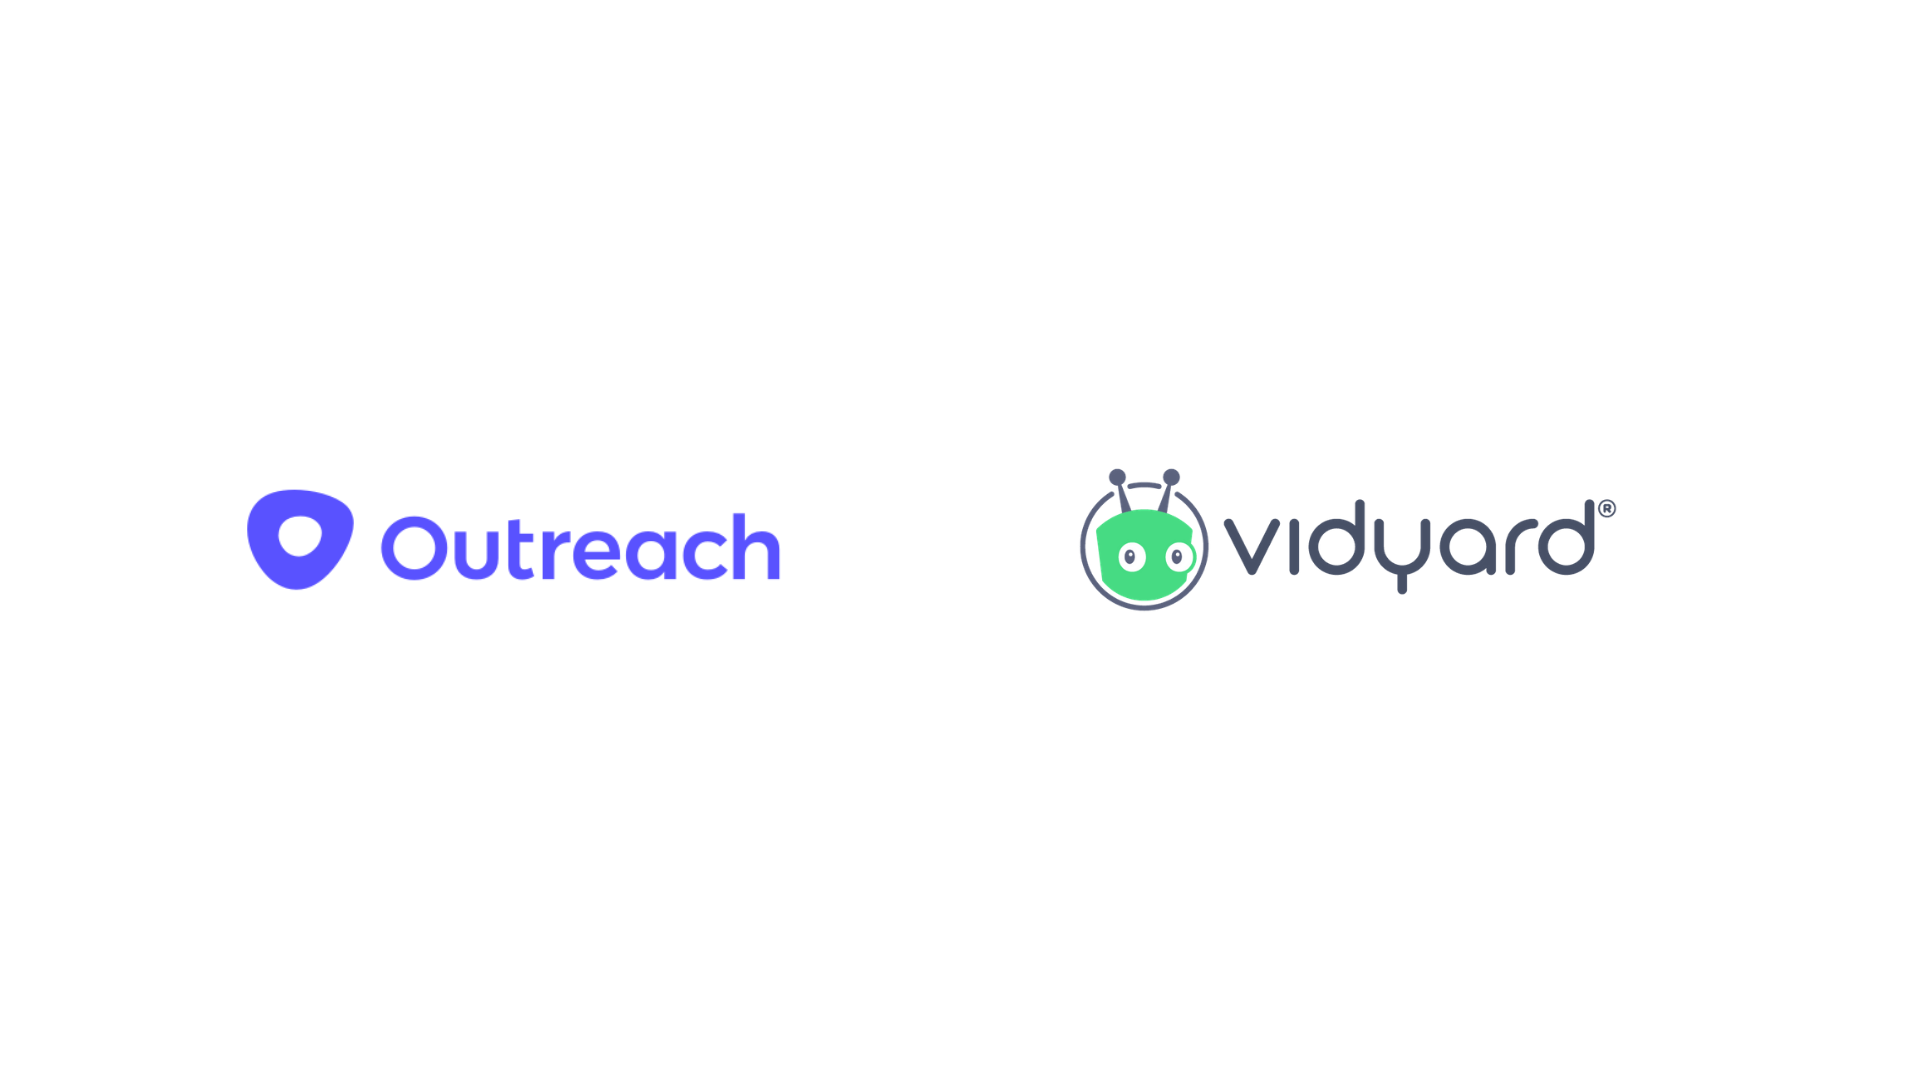 Vidyard and Outreach deliver effective sales videos where you work